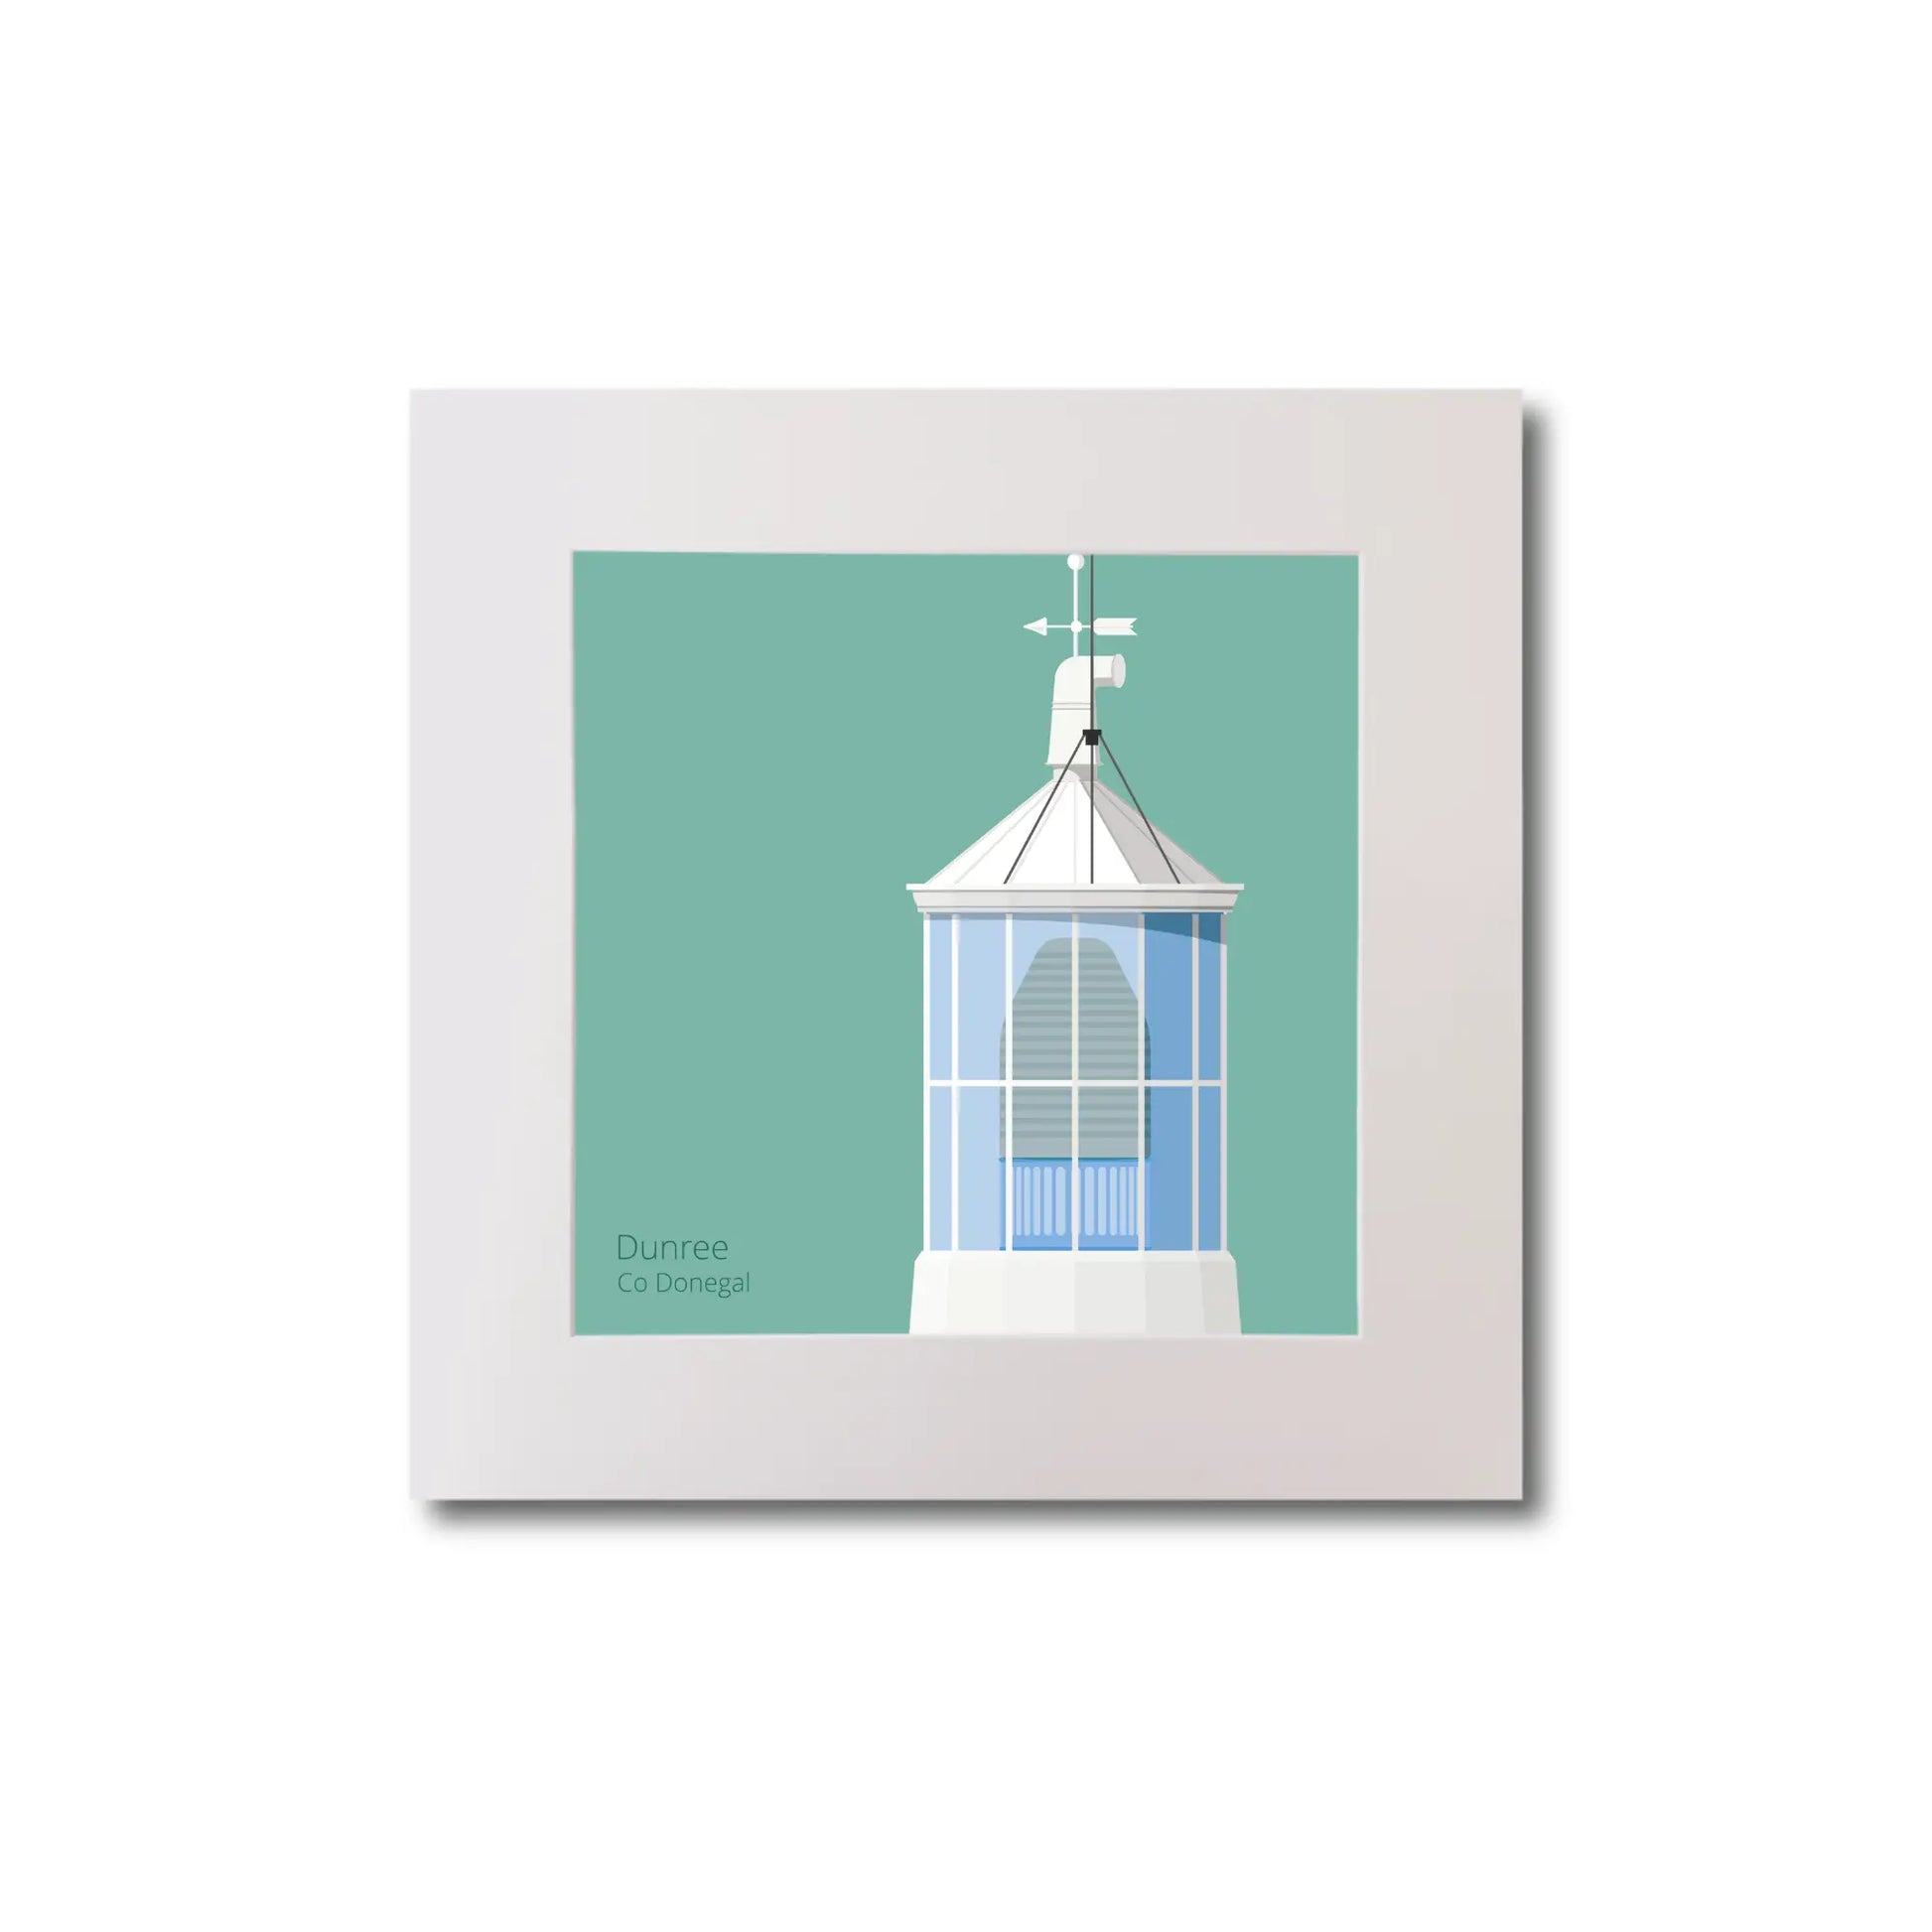 Illustration Dunree lighthouse on an ocean green background, mounted and measuring 20x20cm.